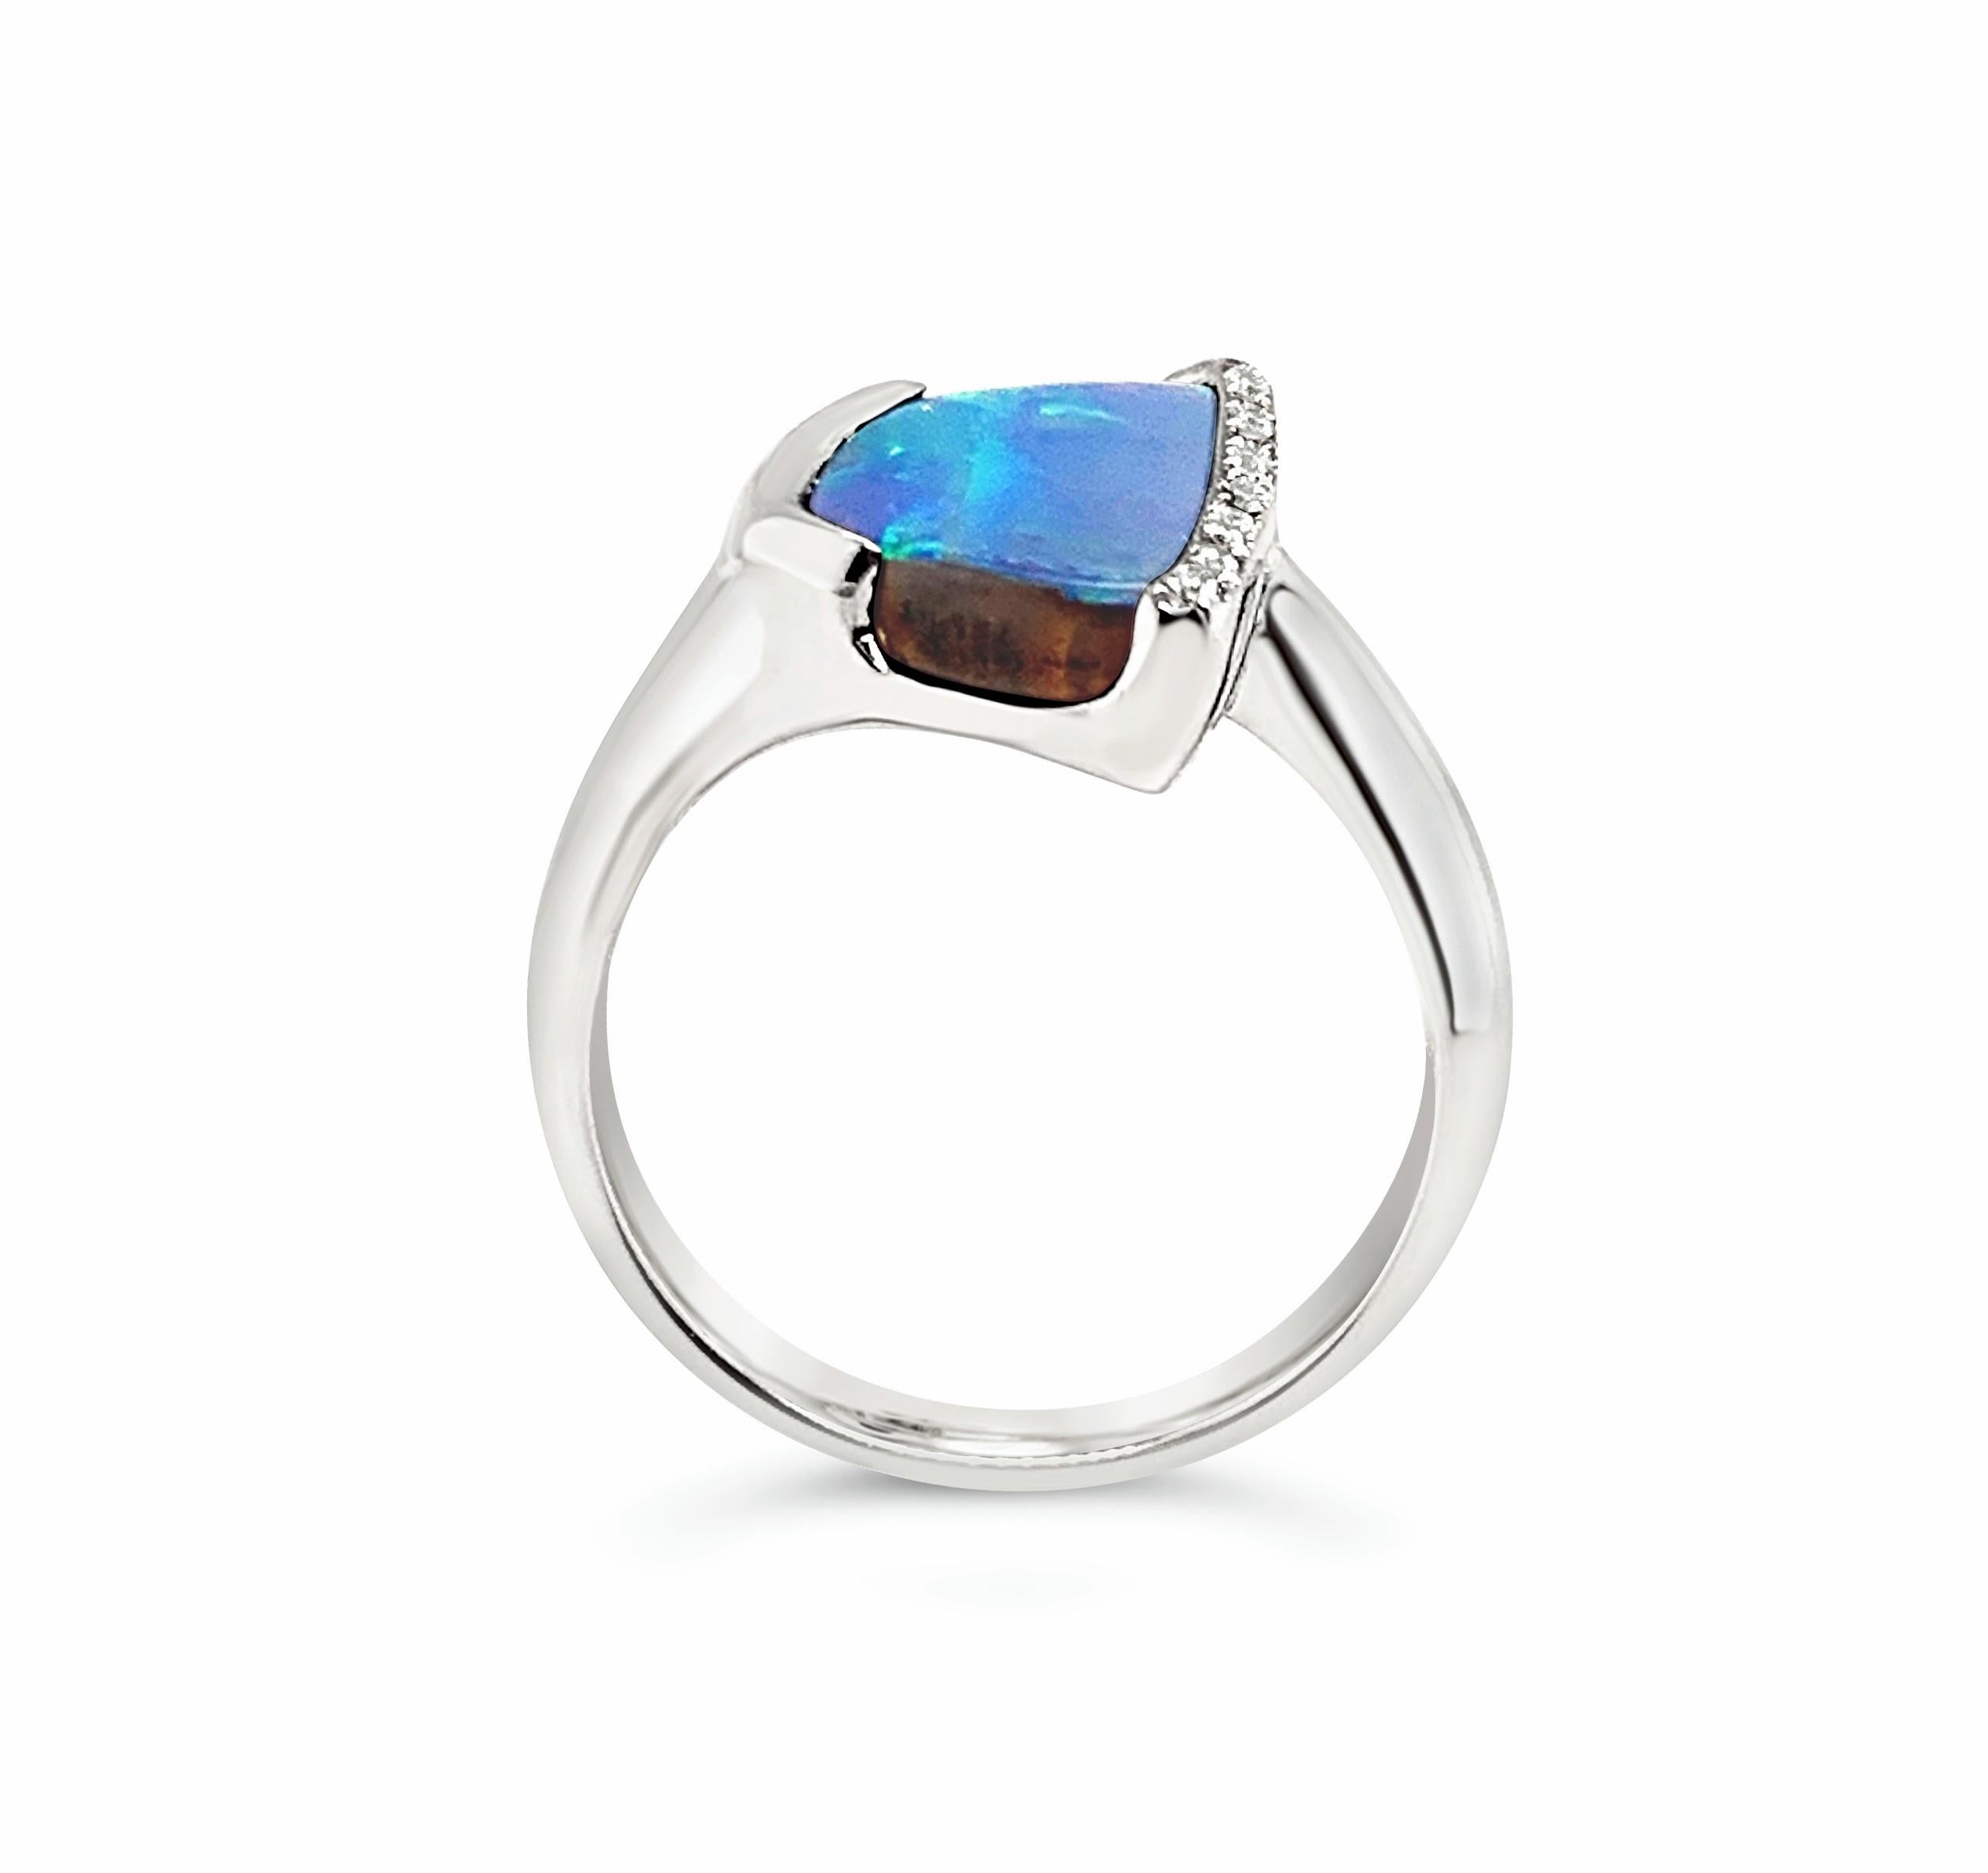 Cabochon Natural Australian 4.28ct Boulder Opal and Diamond Cocktail Ring 18K White Gold For Sale